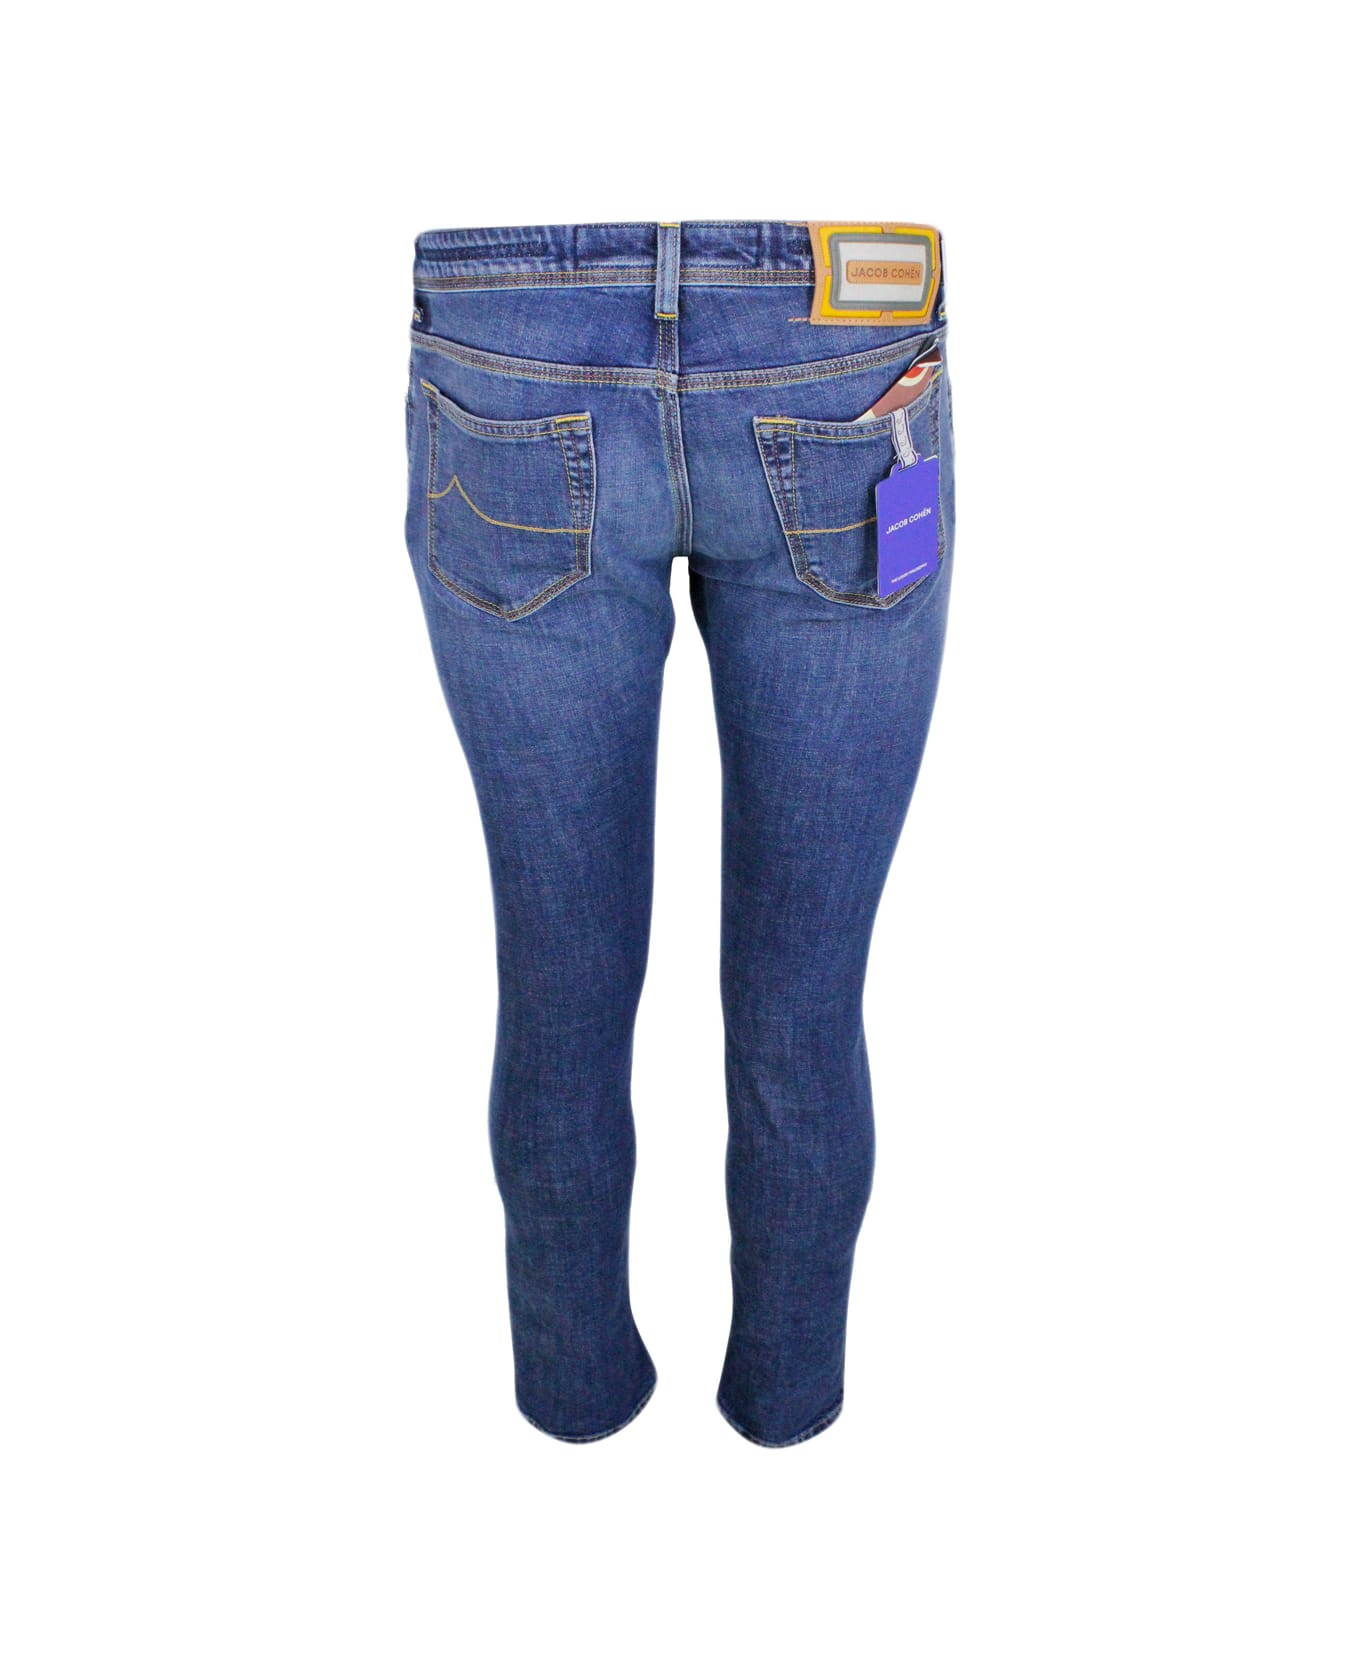 Jacob Cohen Bard J688 Luxury Edition Denim Trousers In Soft Stretch Denim With 5 Pockets With Closure Buttons And Metal Button, Pony Skin Tag With Logo - Denim